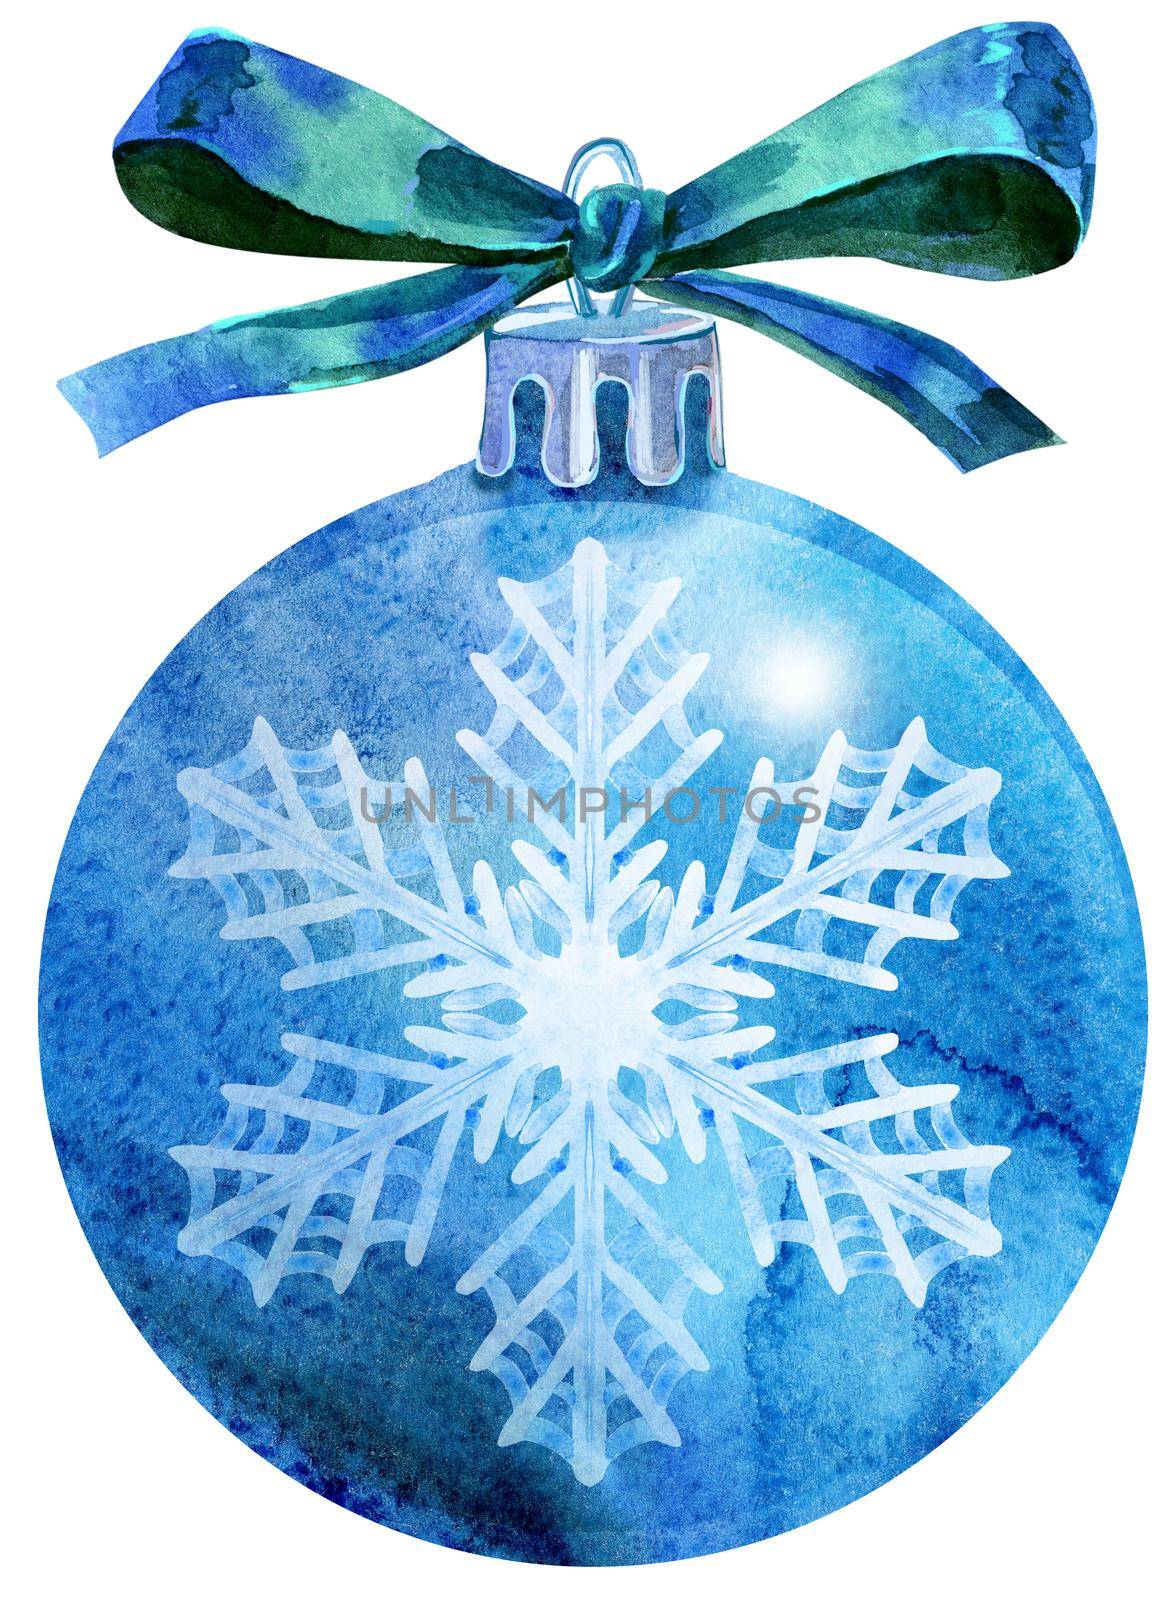 Watercolor Christmas blue ball with bow isolated on a white background.